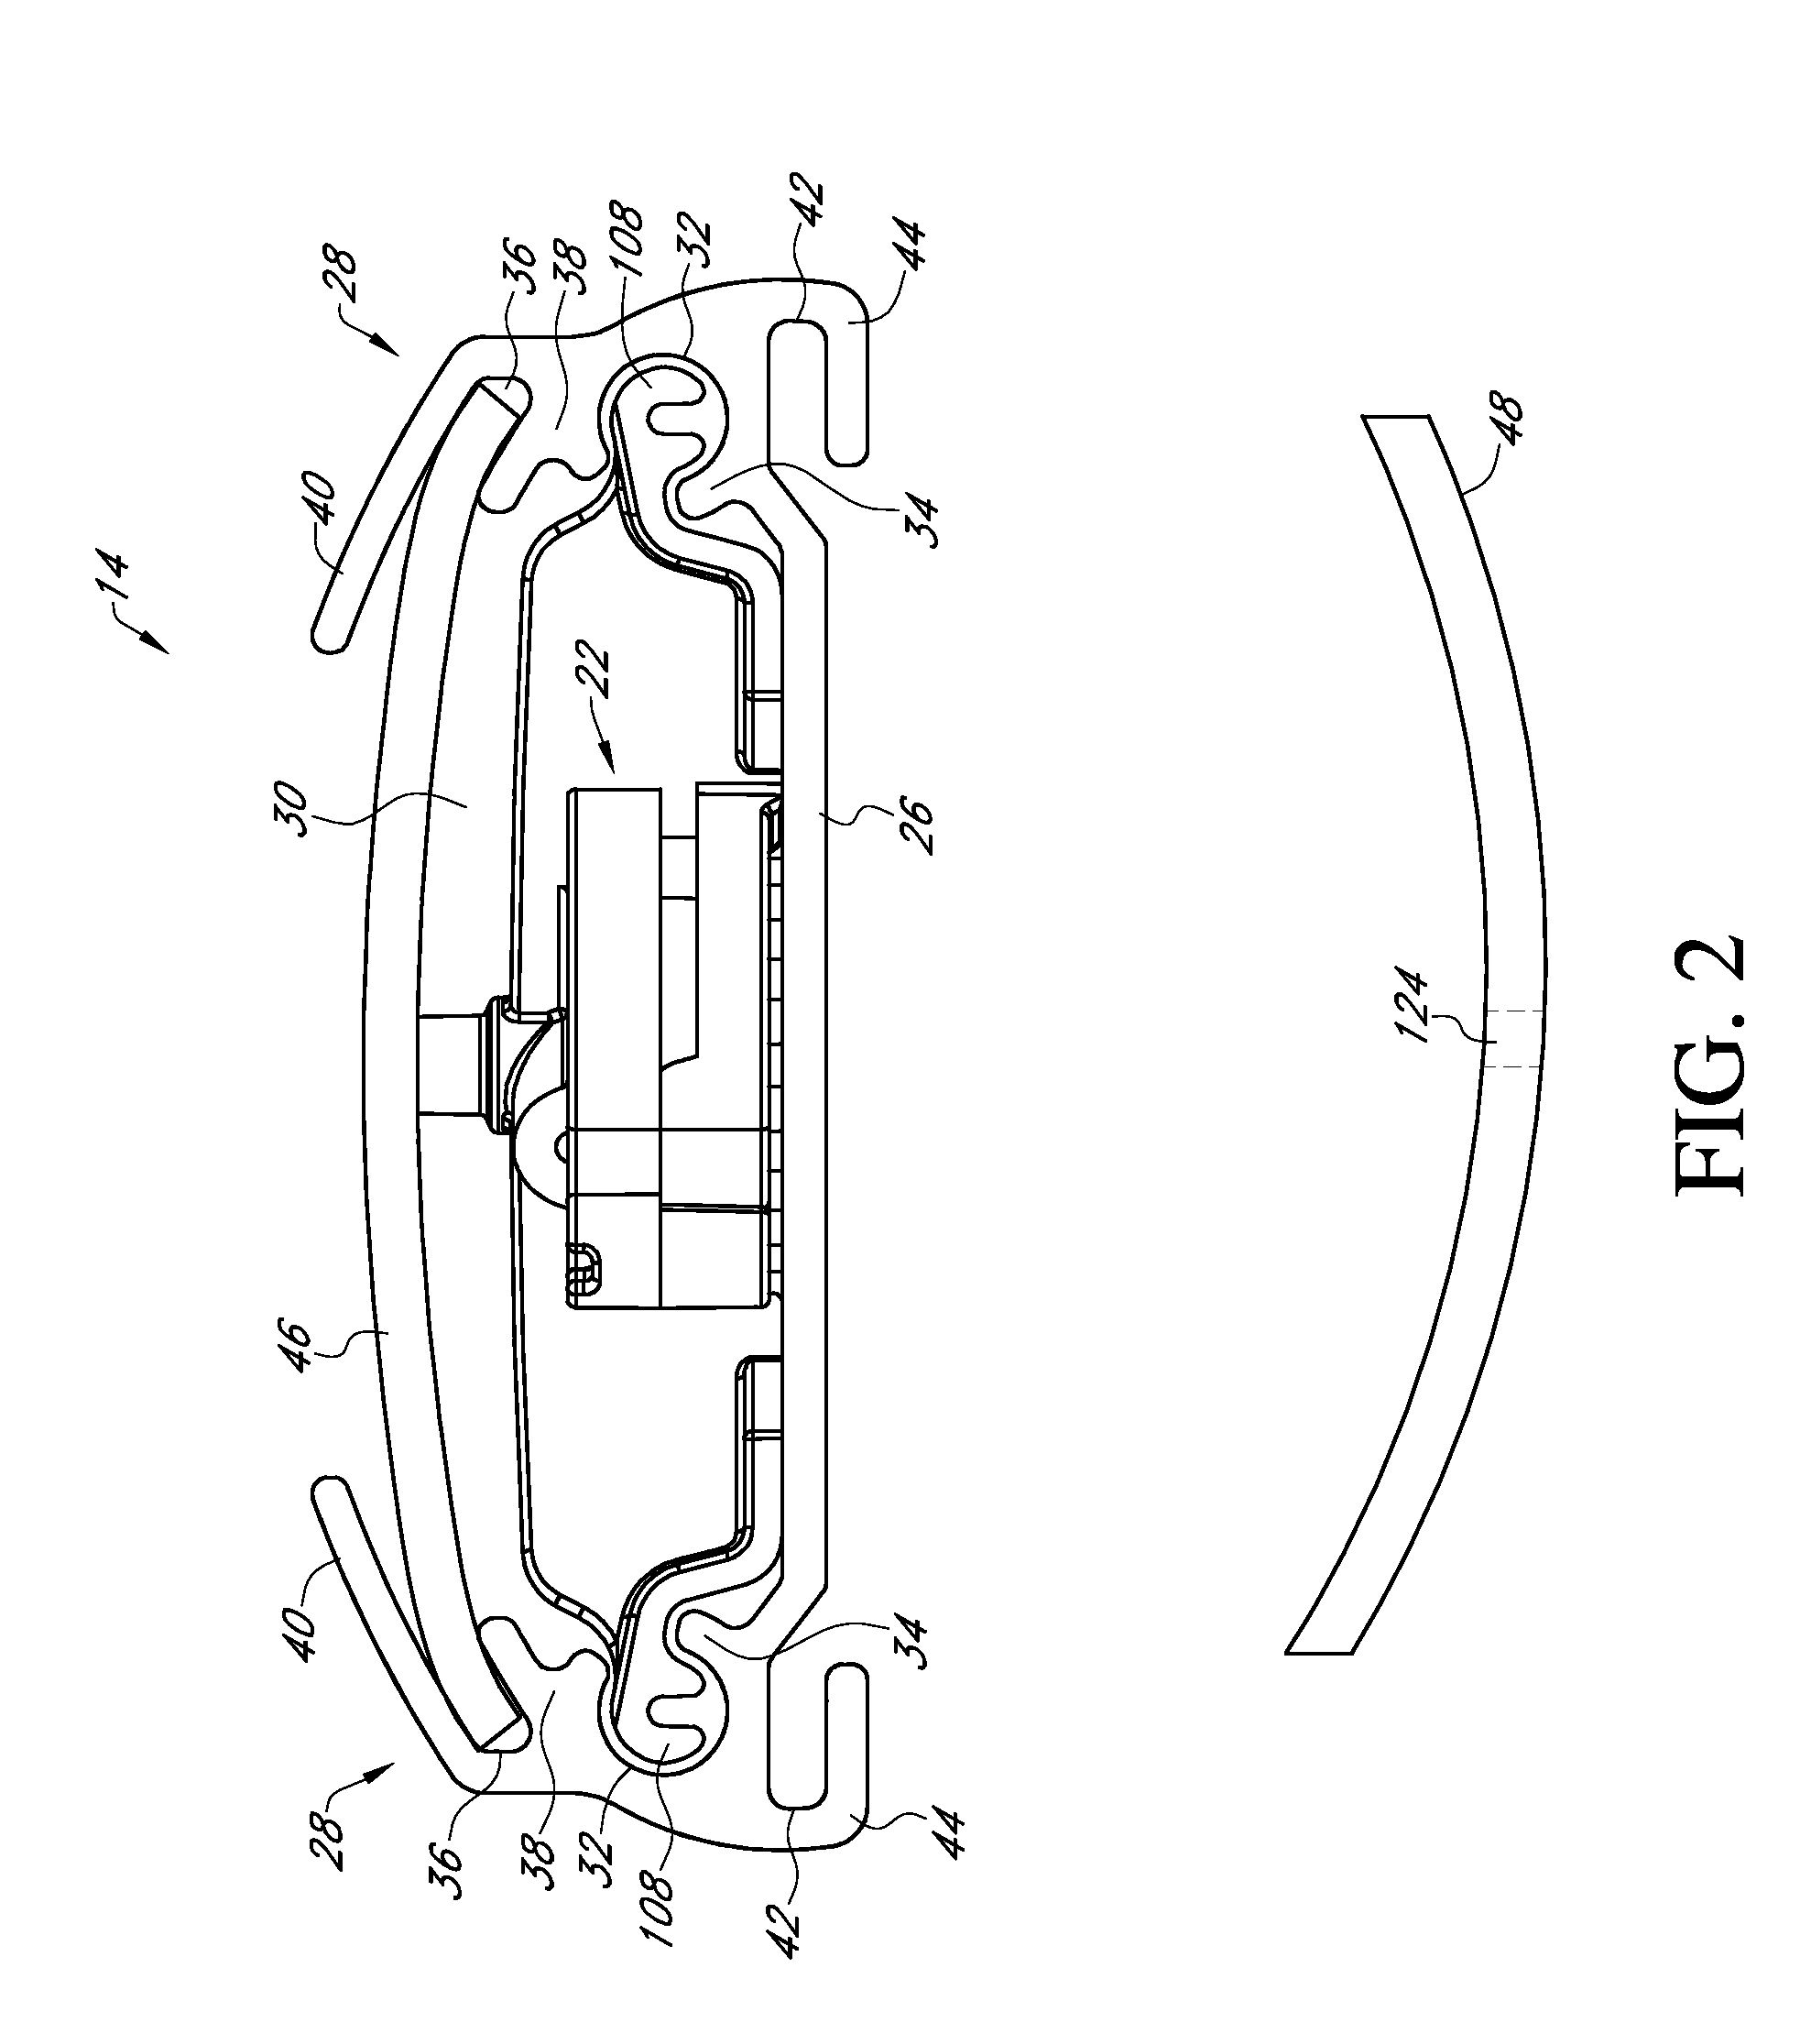 Battery powered venetian and roman shade system and methods of use